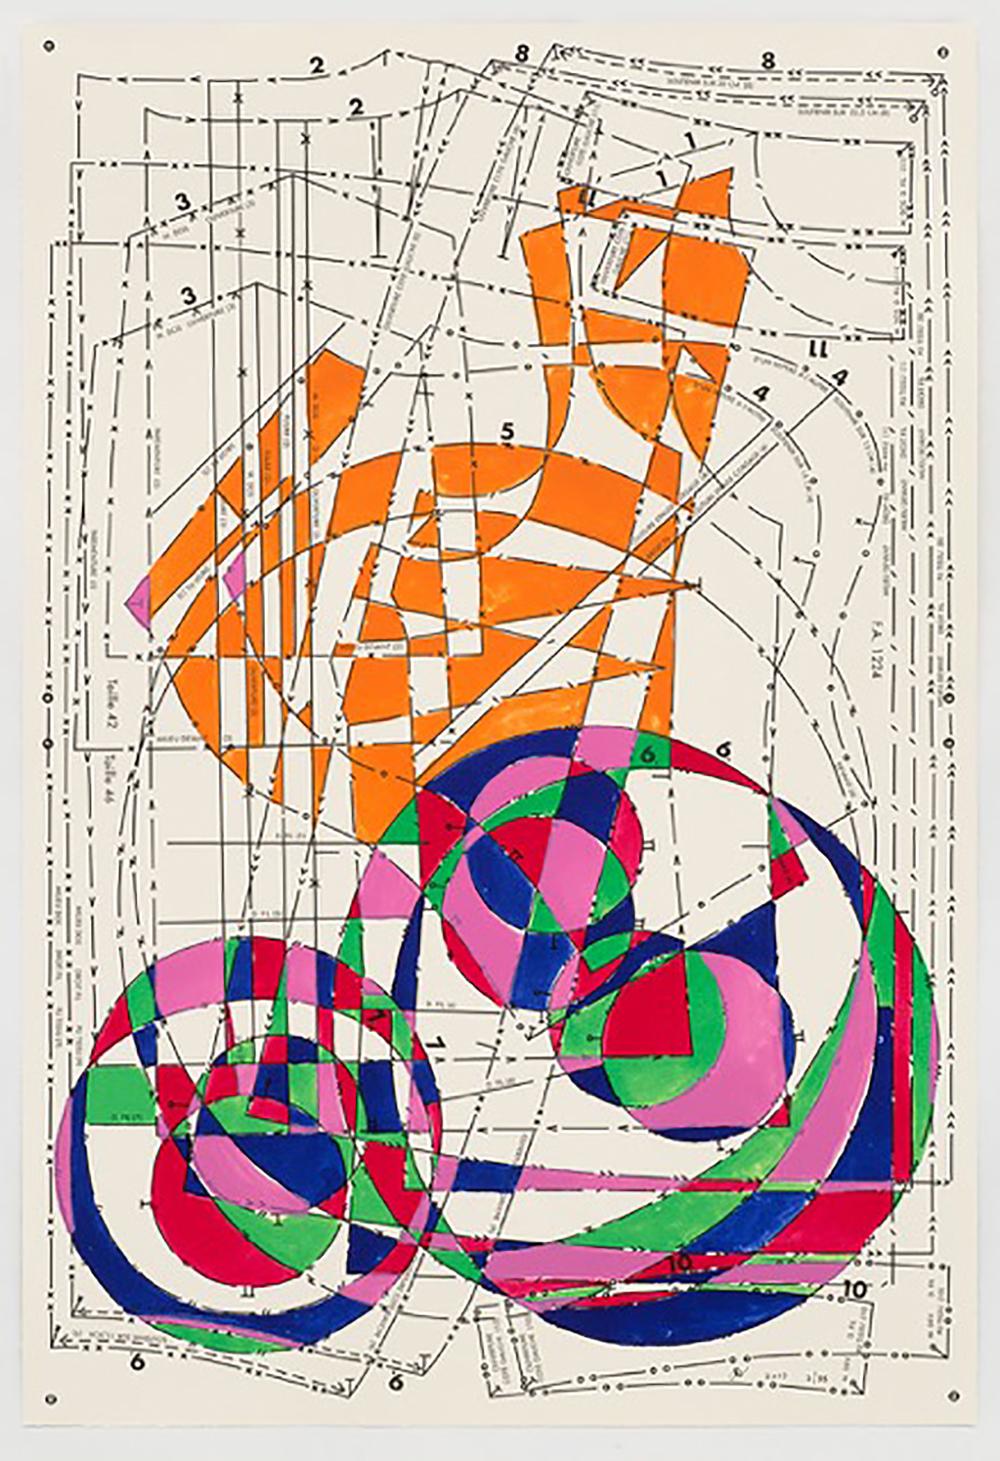 Just like the humble yet beautiful stamp, which travels the world on a paper envelope, Narielwalla’s work bears a global imprint. His fascination with human adornment also encompasses the traditions of West Africa (which feature in A Study on